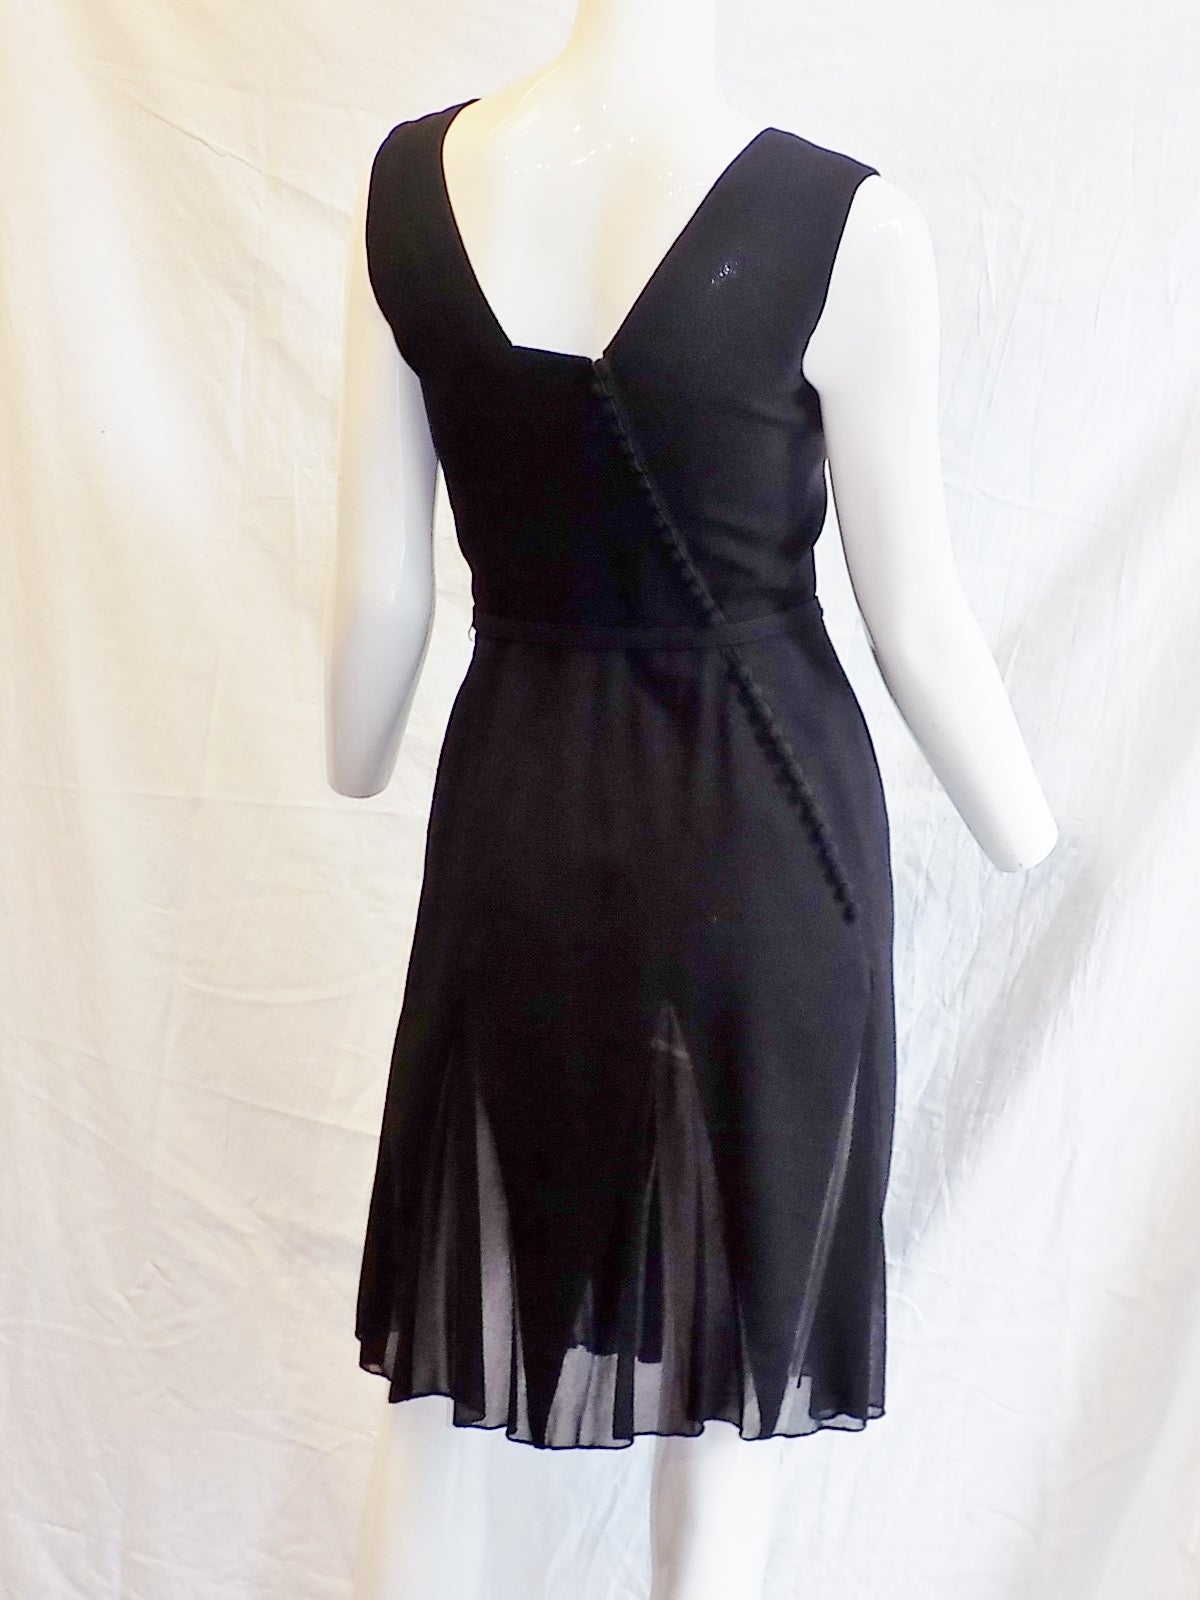 Chanel Haute Couture Black Cocktail Dress In Excellent Condition For Sale In New York, NY